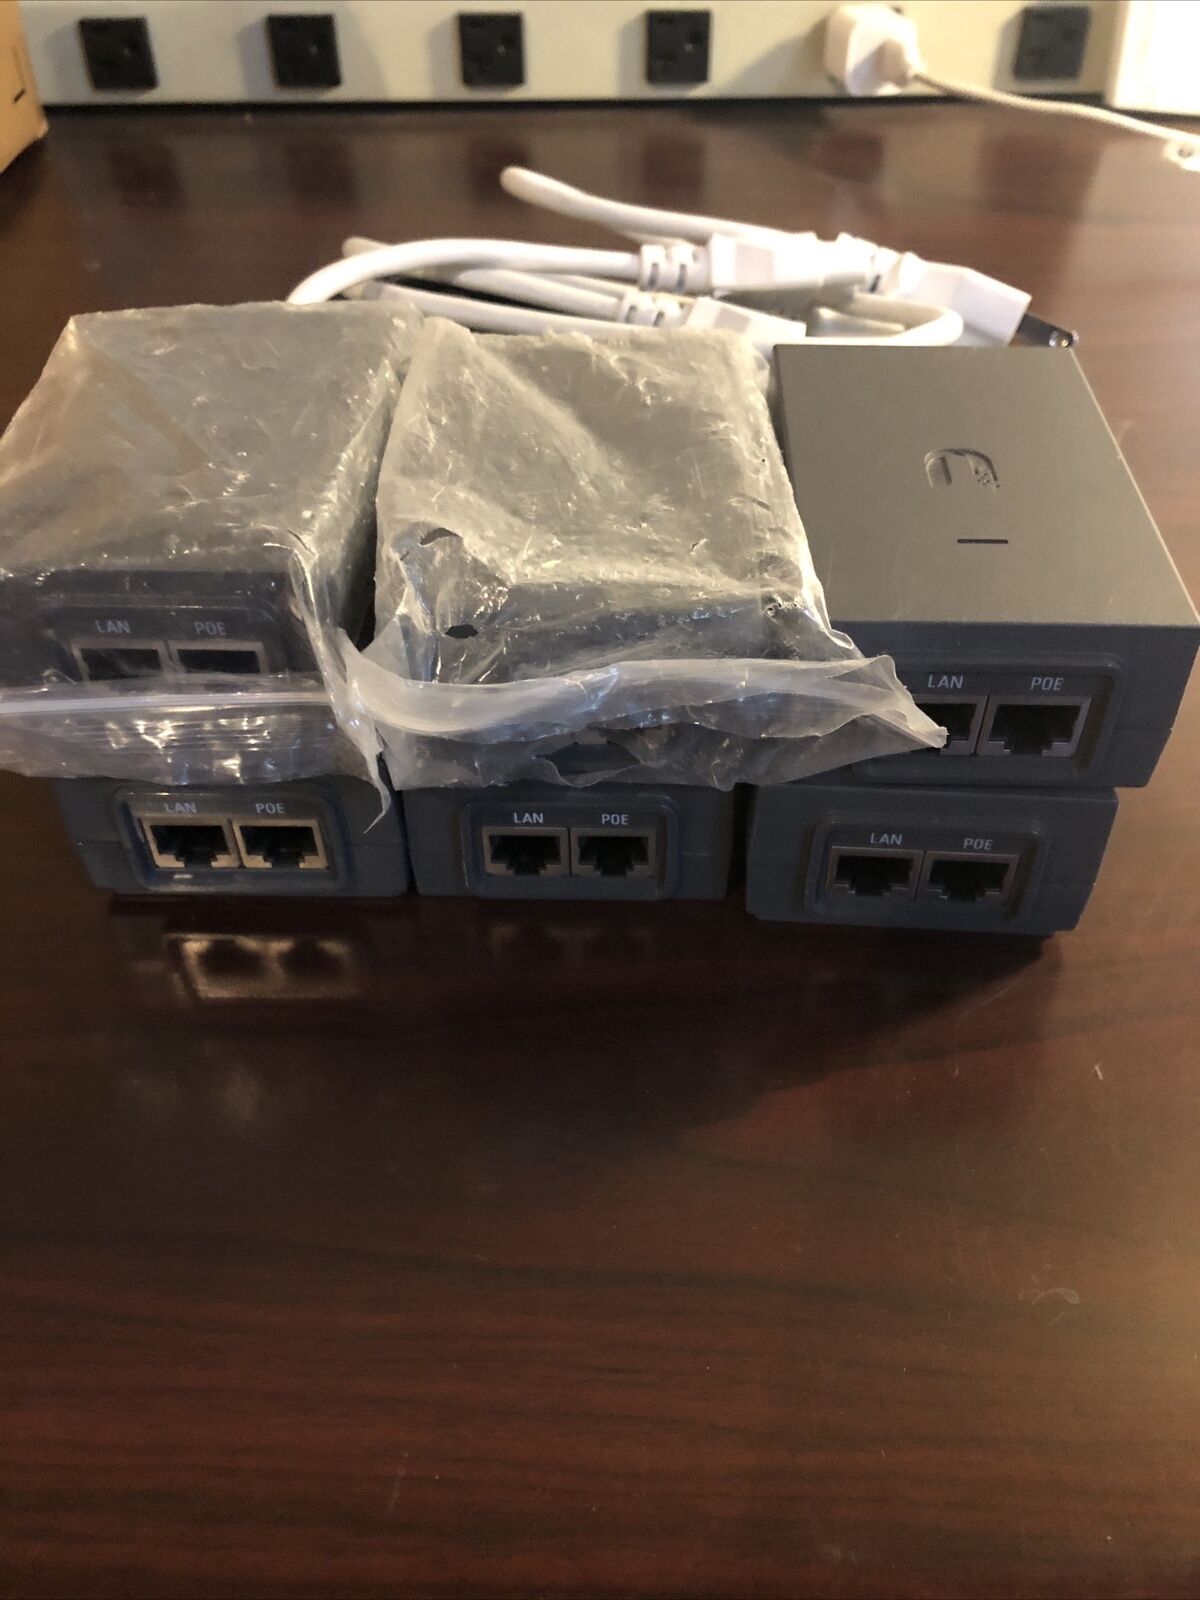 Ubiquiti Networks POE-24-12W-G 24V 1A PoE Injector with Cords.